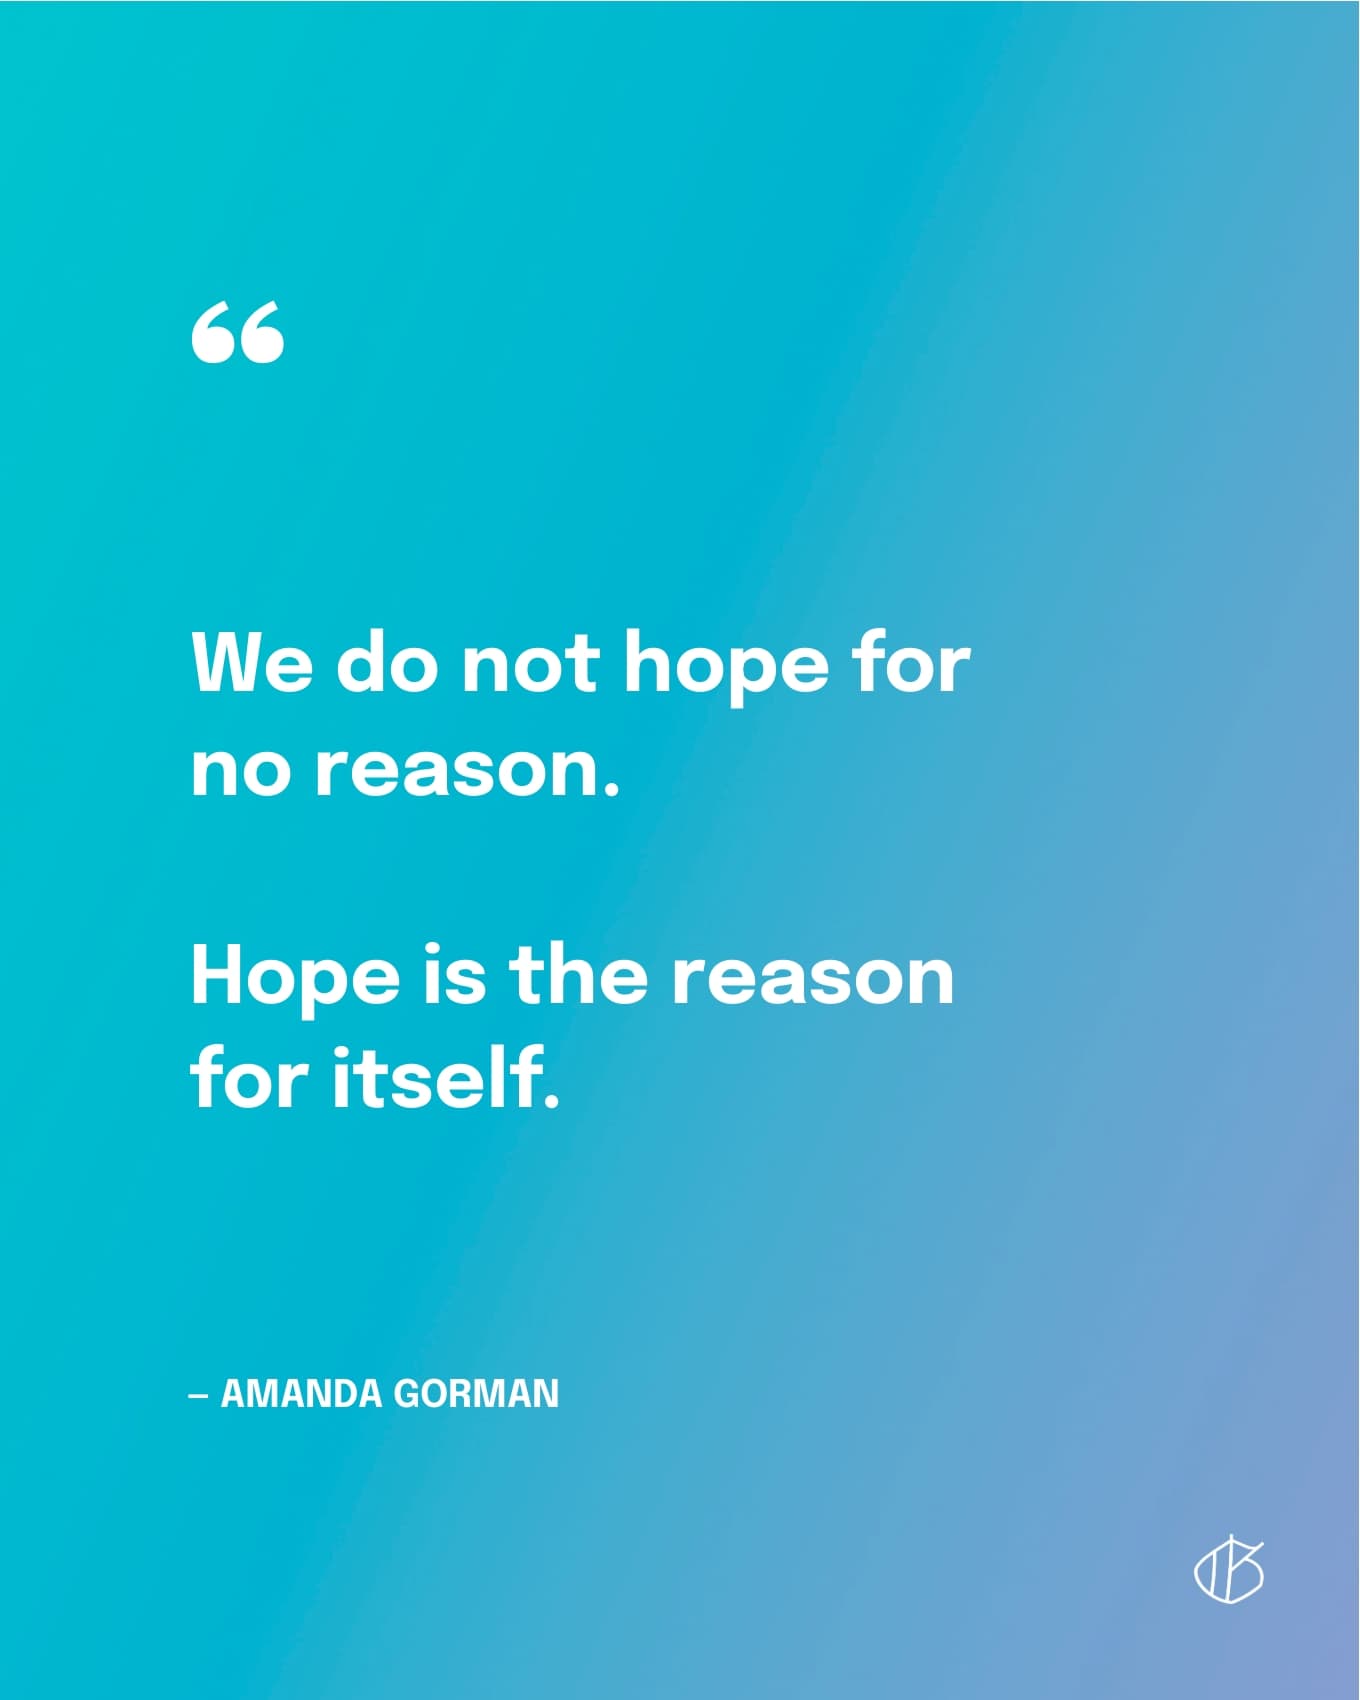 “We do not hope for no reason. Hope is the reason for itself.” — Amanda Gorman Quote